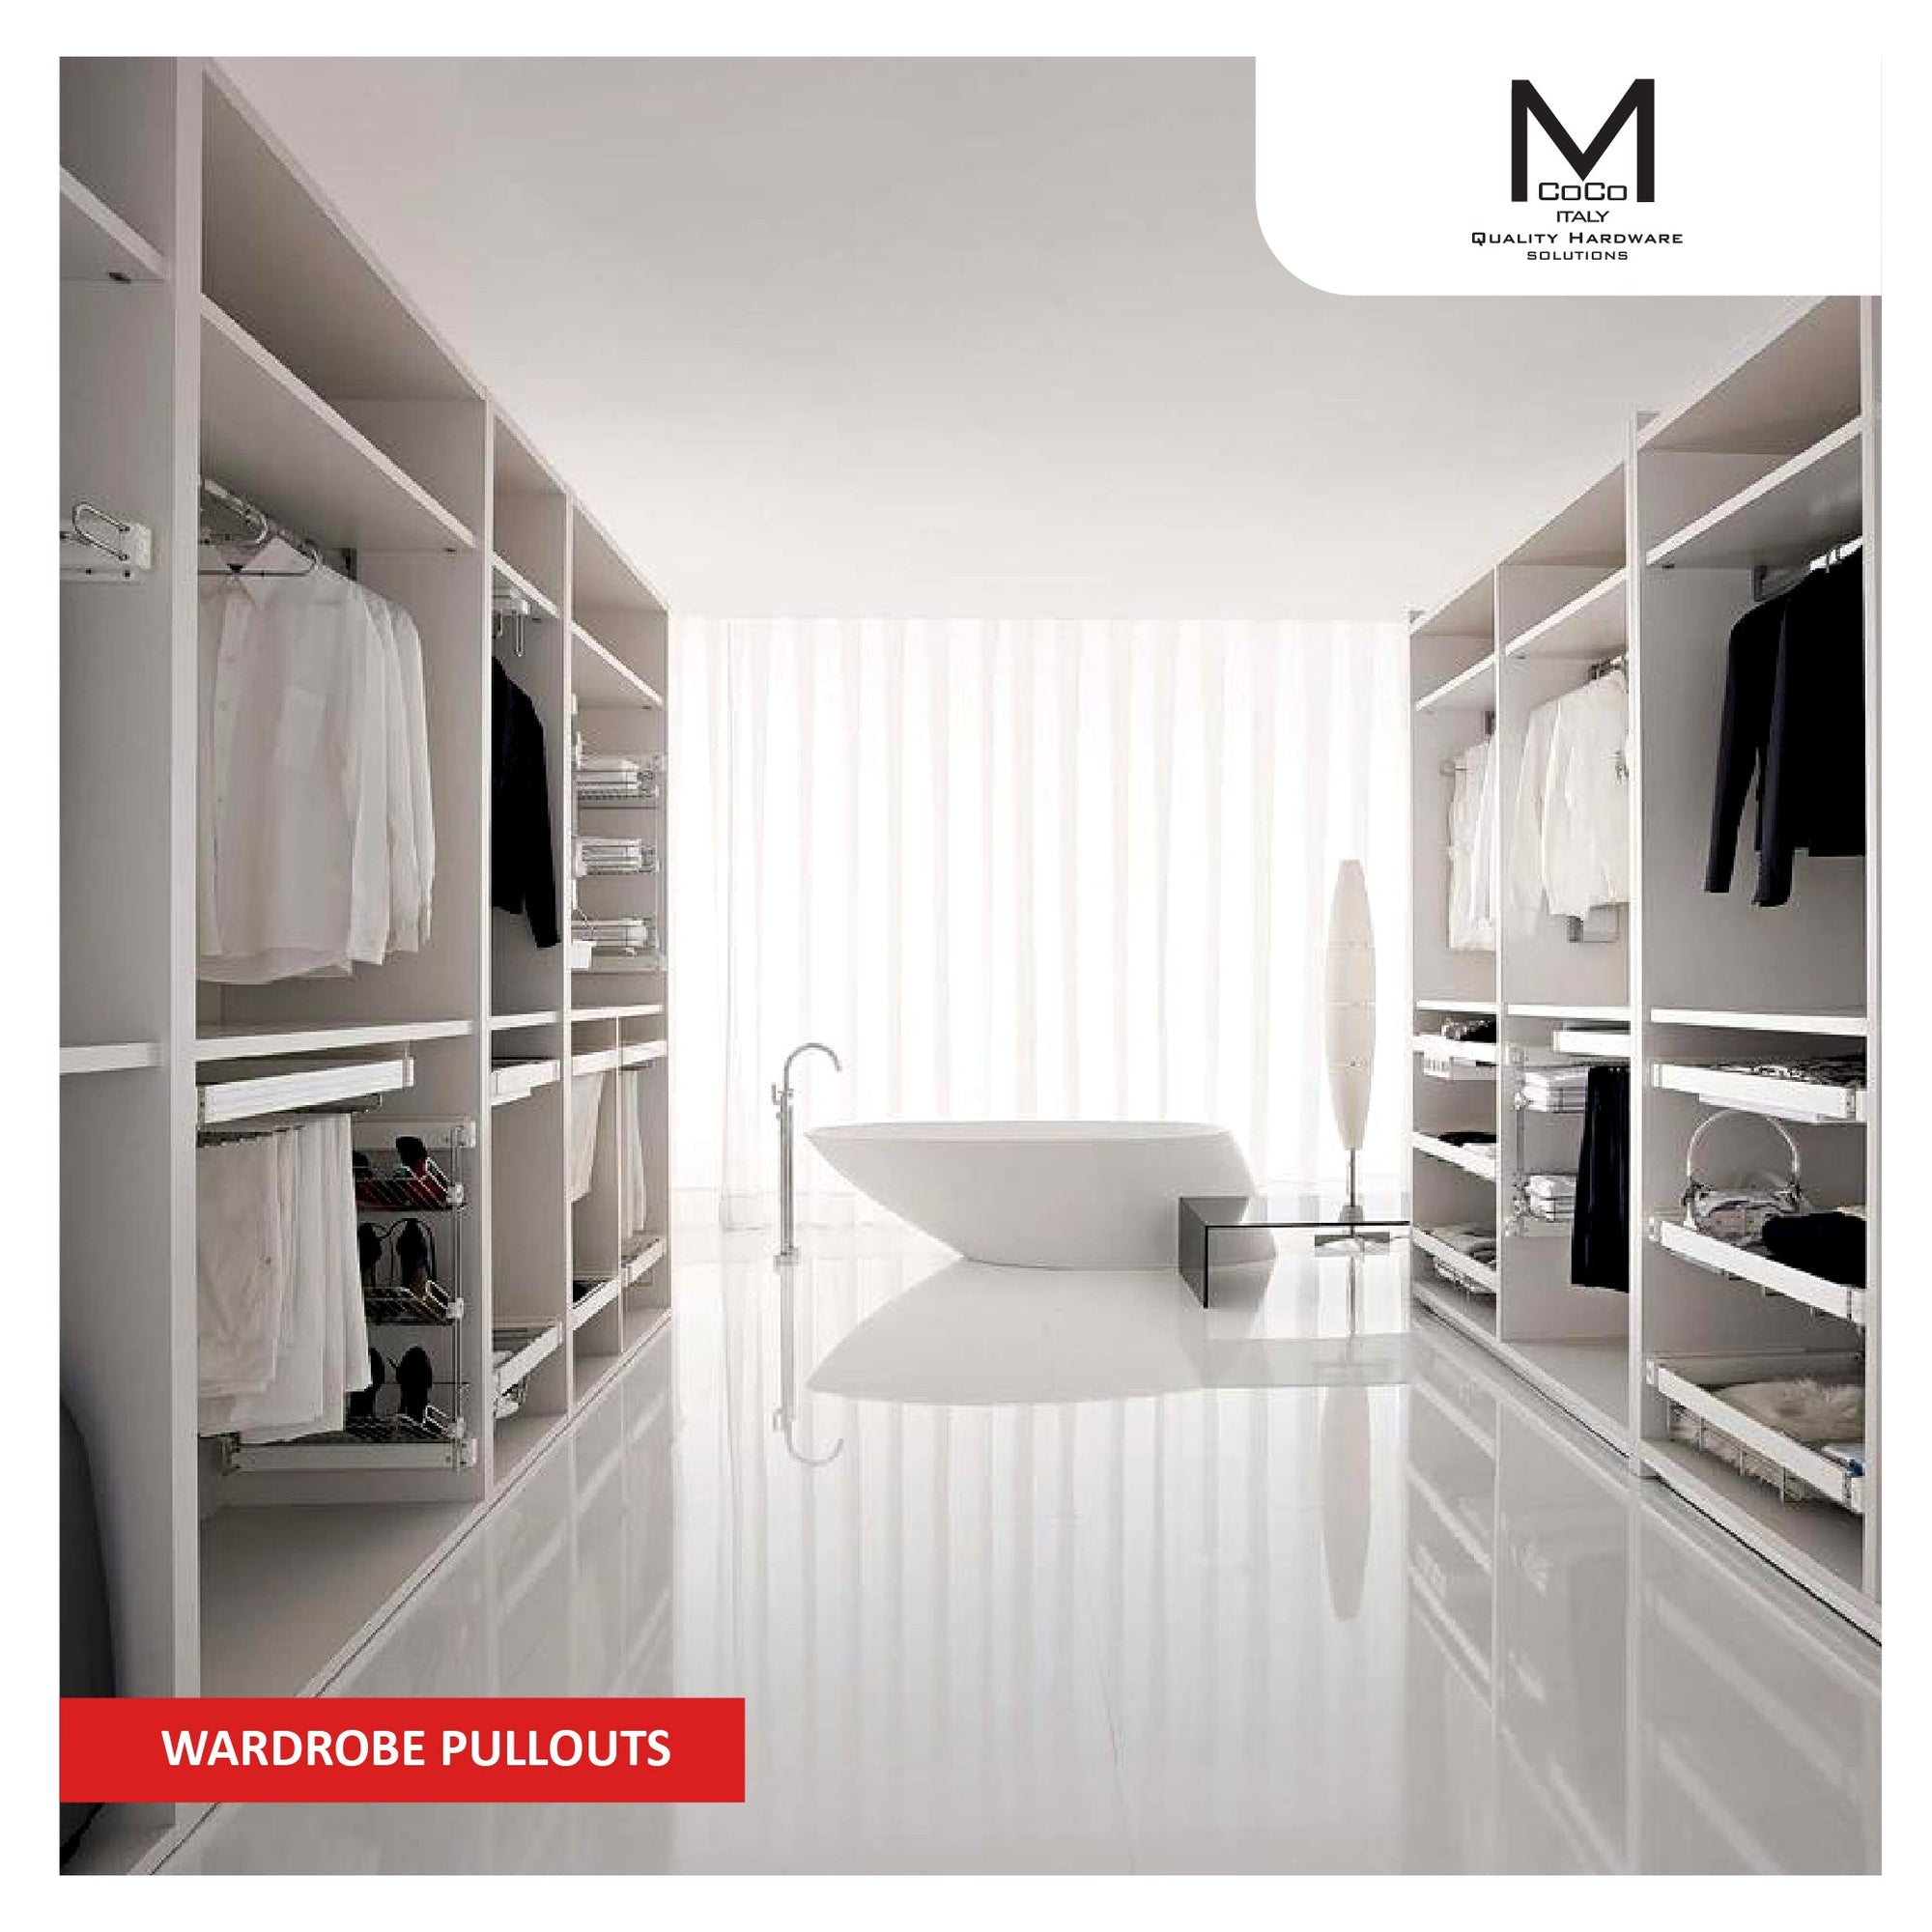 Mcoco Wardrobe Pullouts - Maximize Space and Convenience